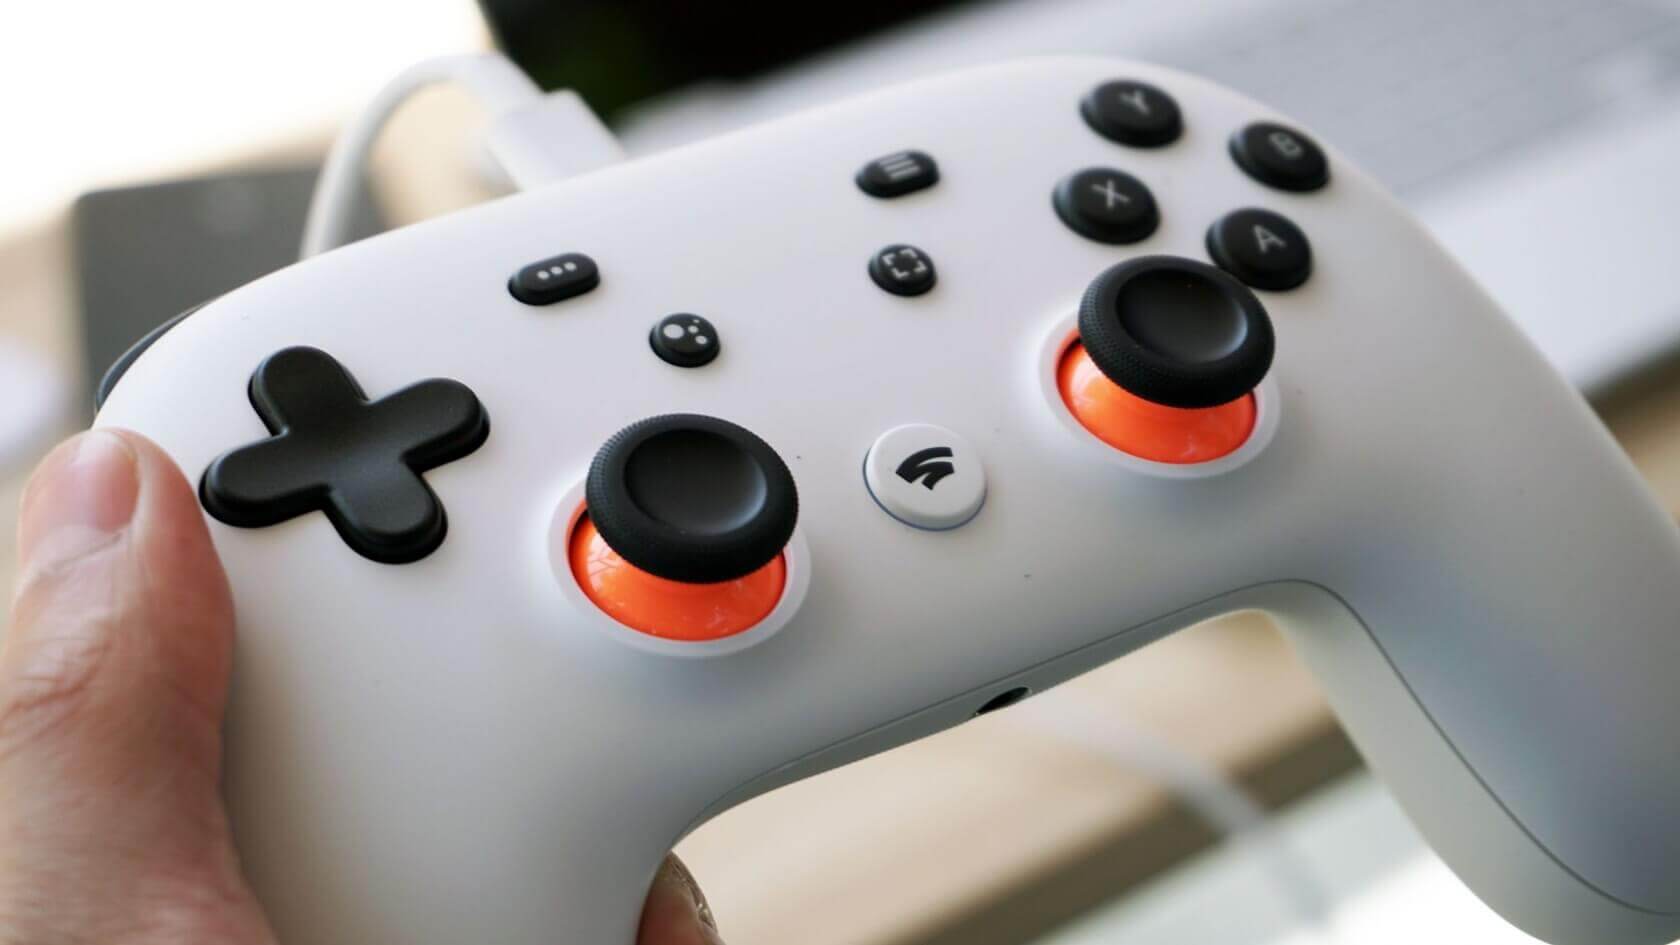 Google Stadia attracts more than 4,000 developers for its partners program